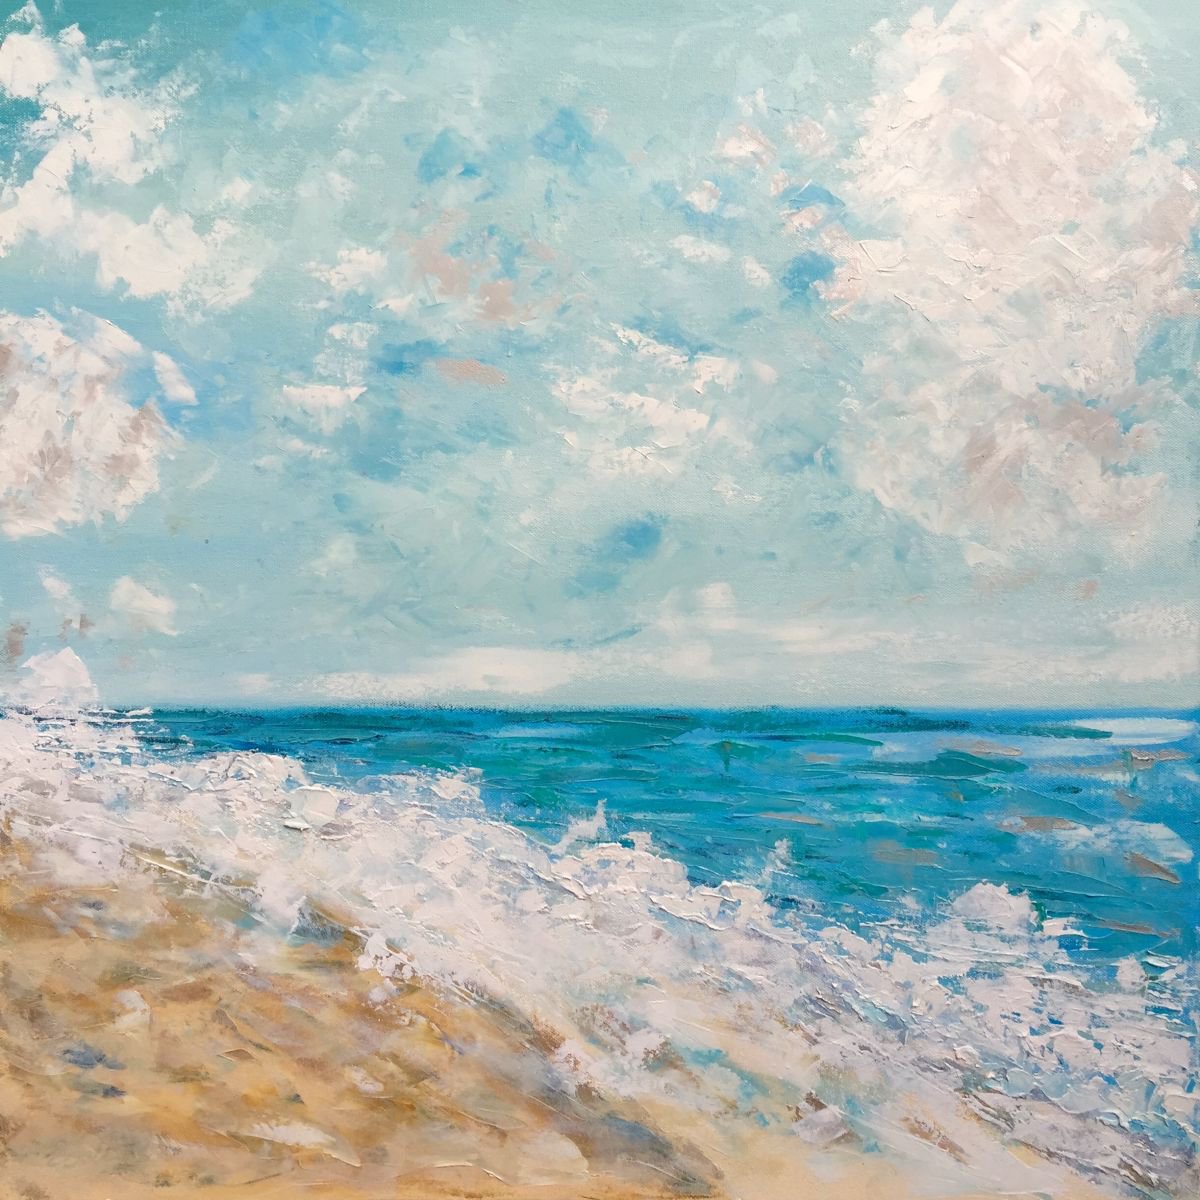 Glory at the Beach 24x24 oil on canvas with palette knife by Emma Bell